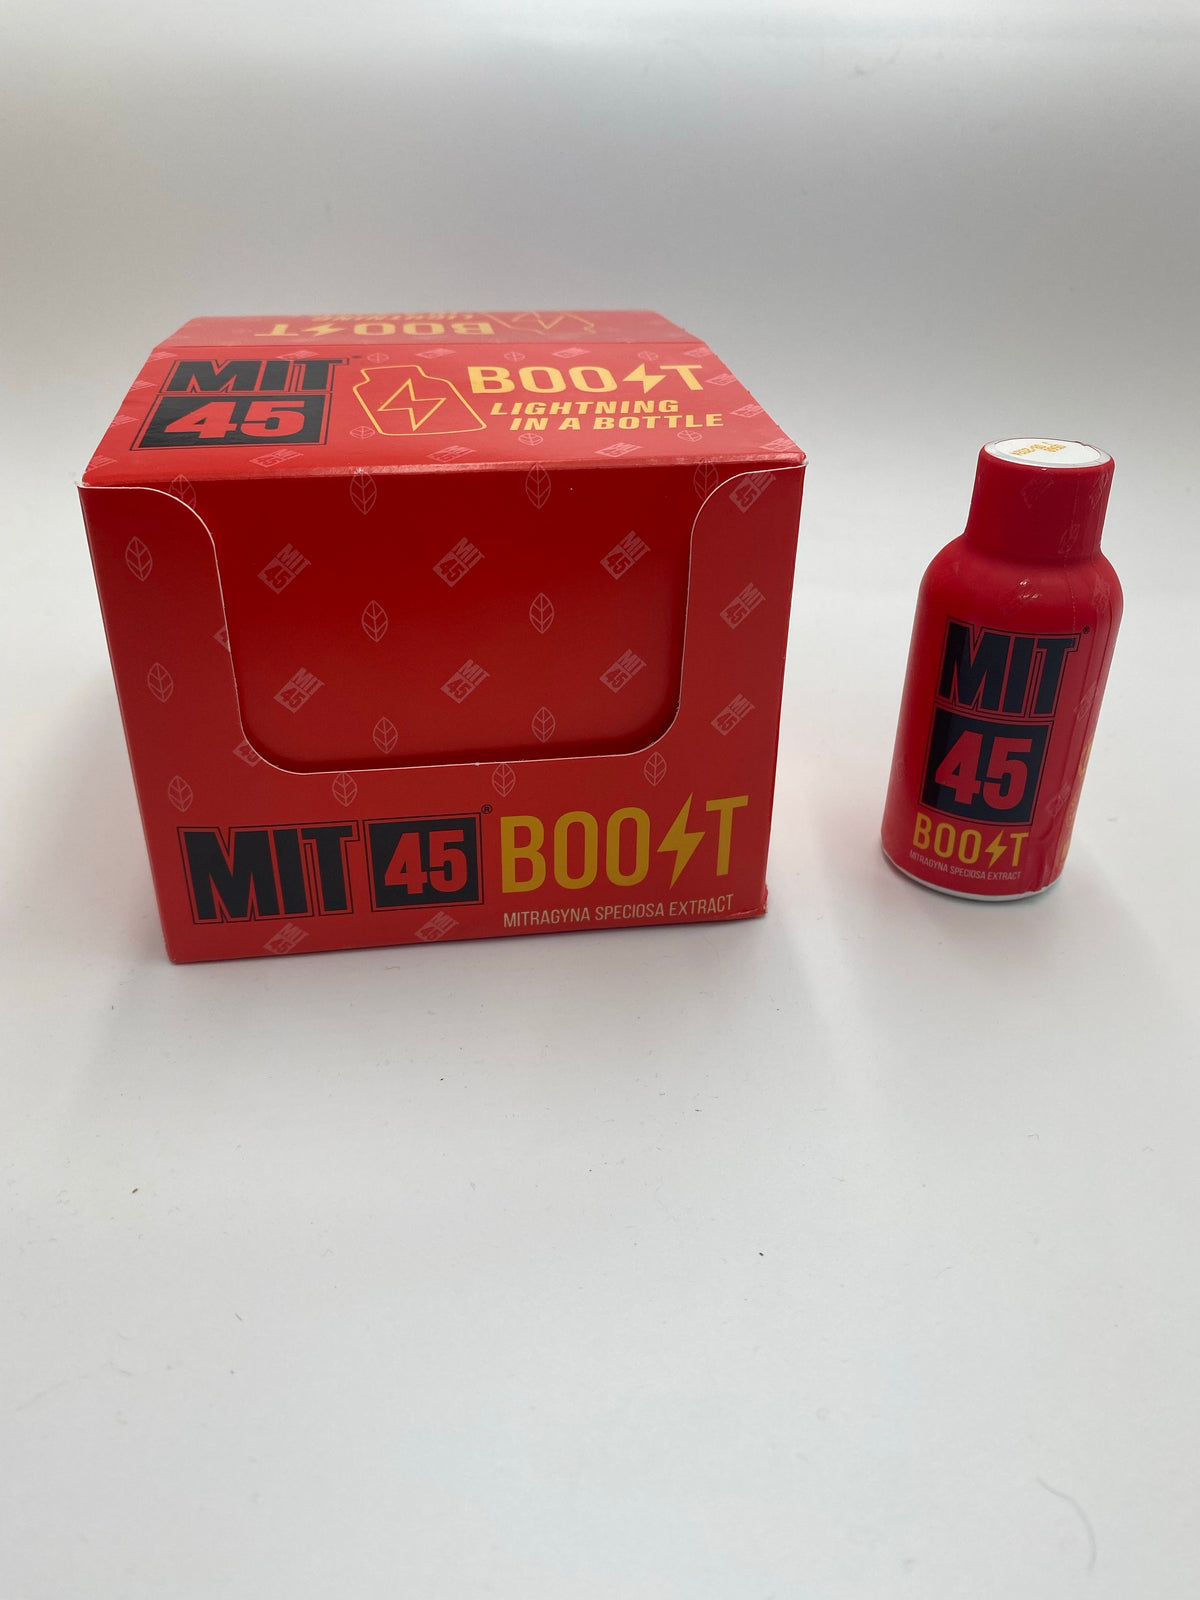 MIT 45 BOOST SHOTS "LIGHTNING IN A BOTTLE" 12 CT DISPLAY